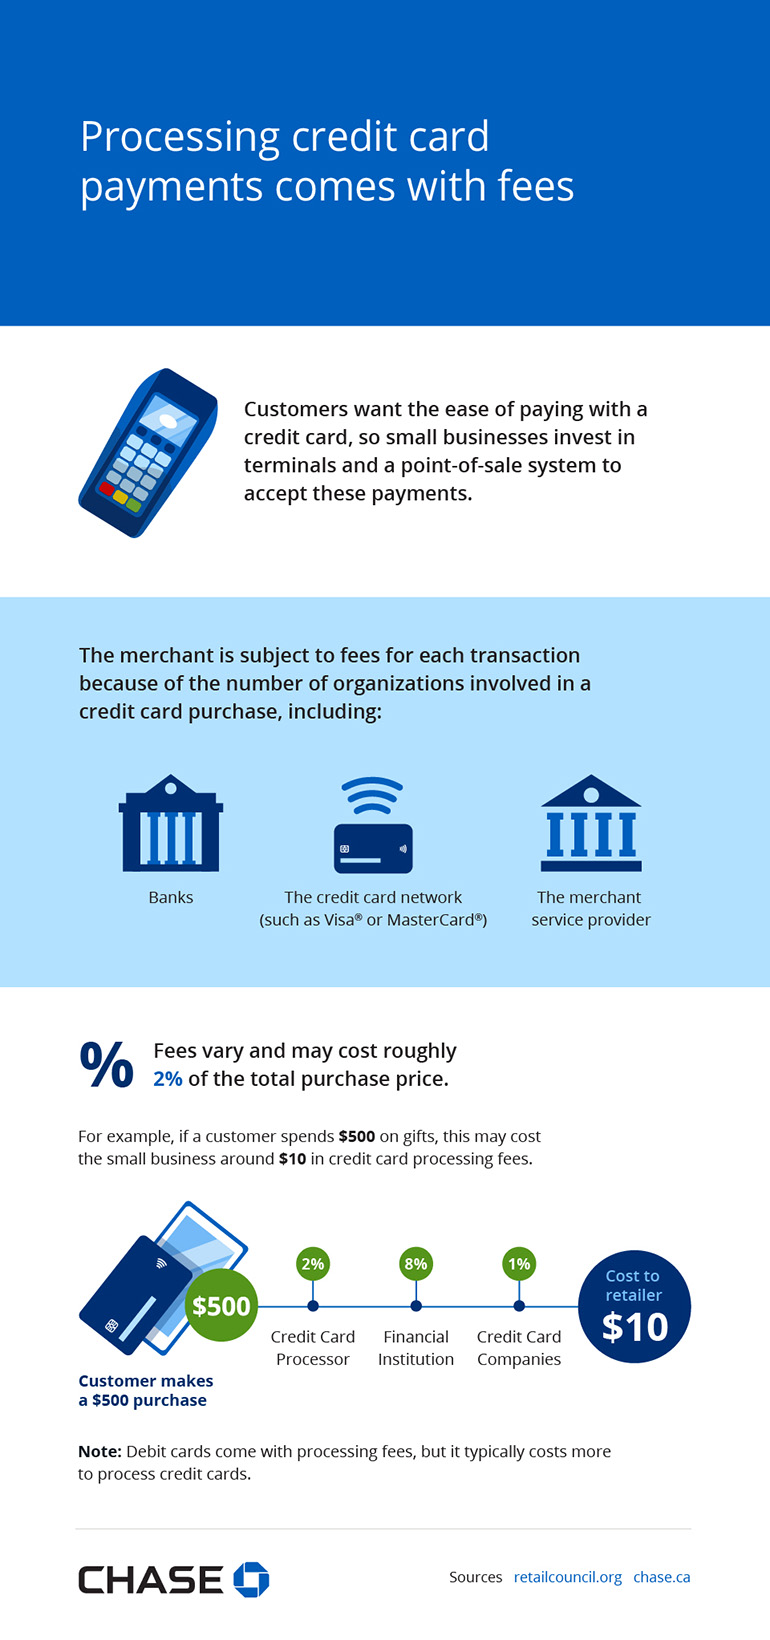 Infographic illustrating the fees that come with processing credit card payments